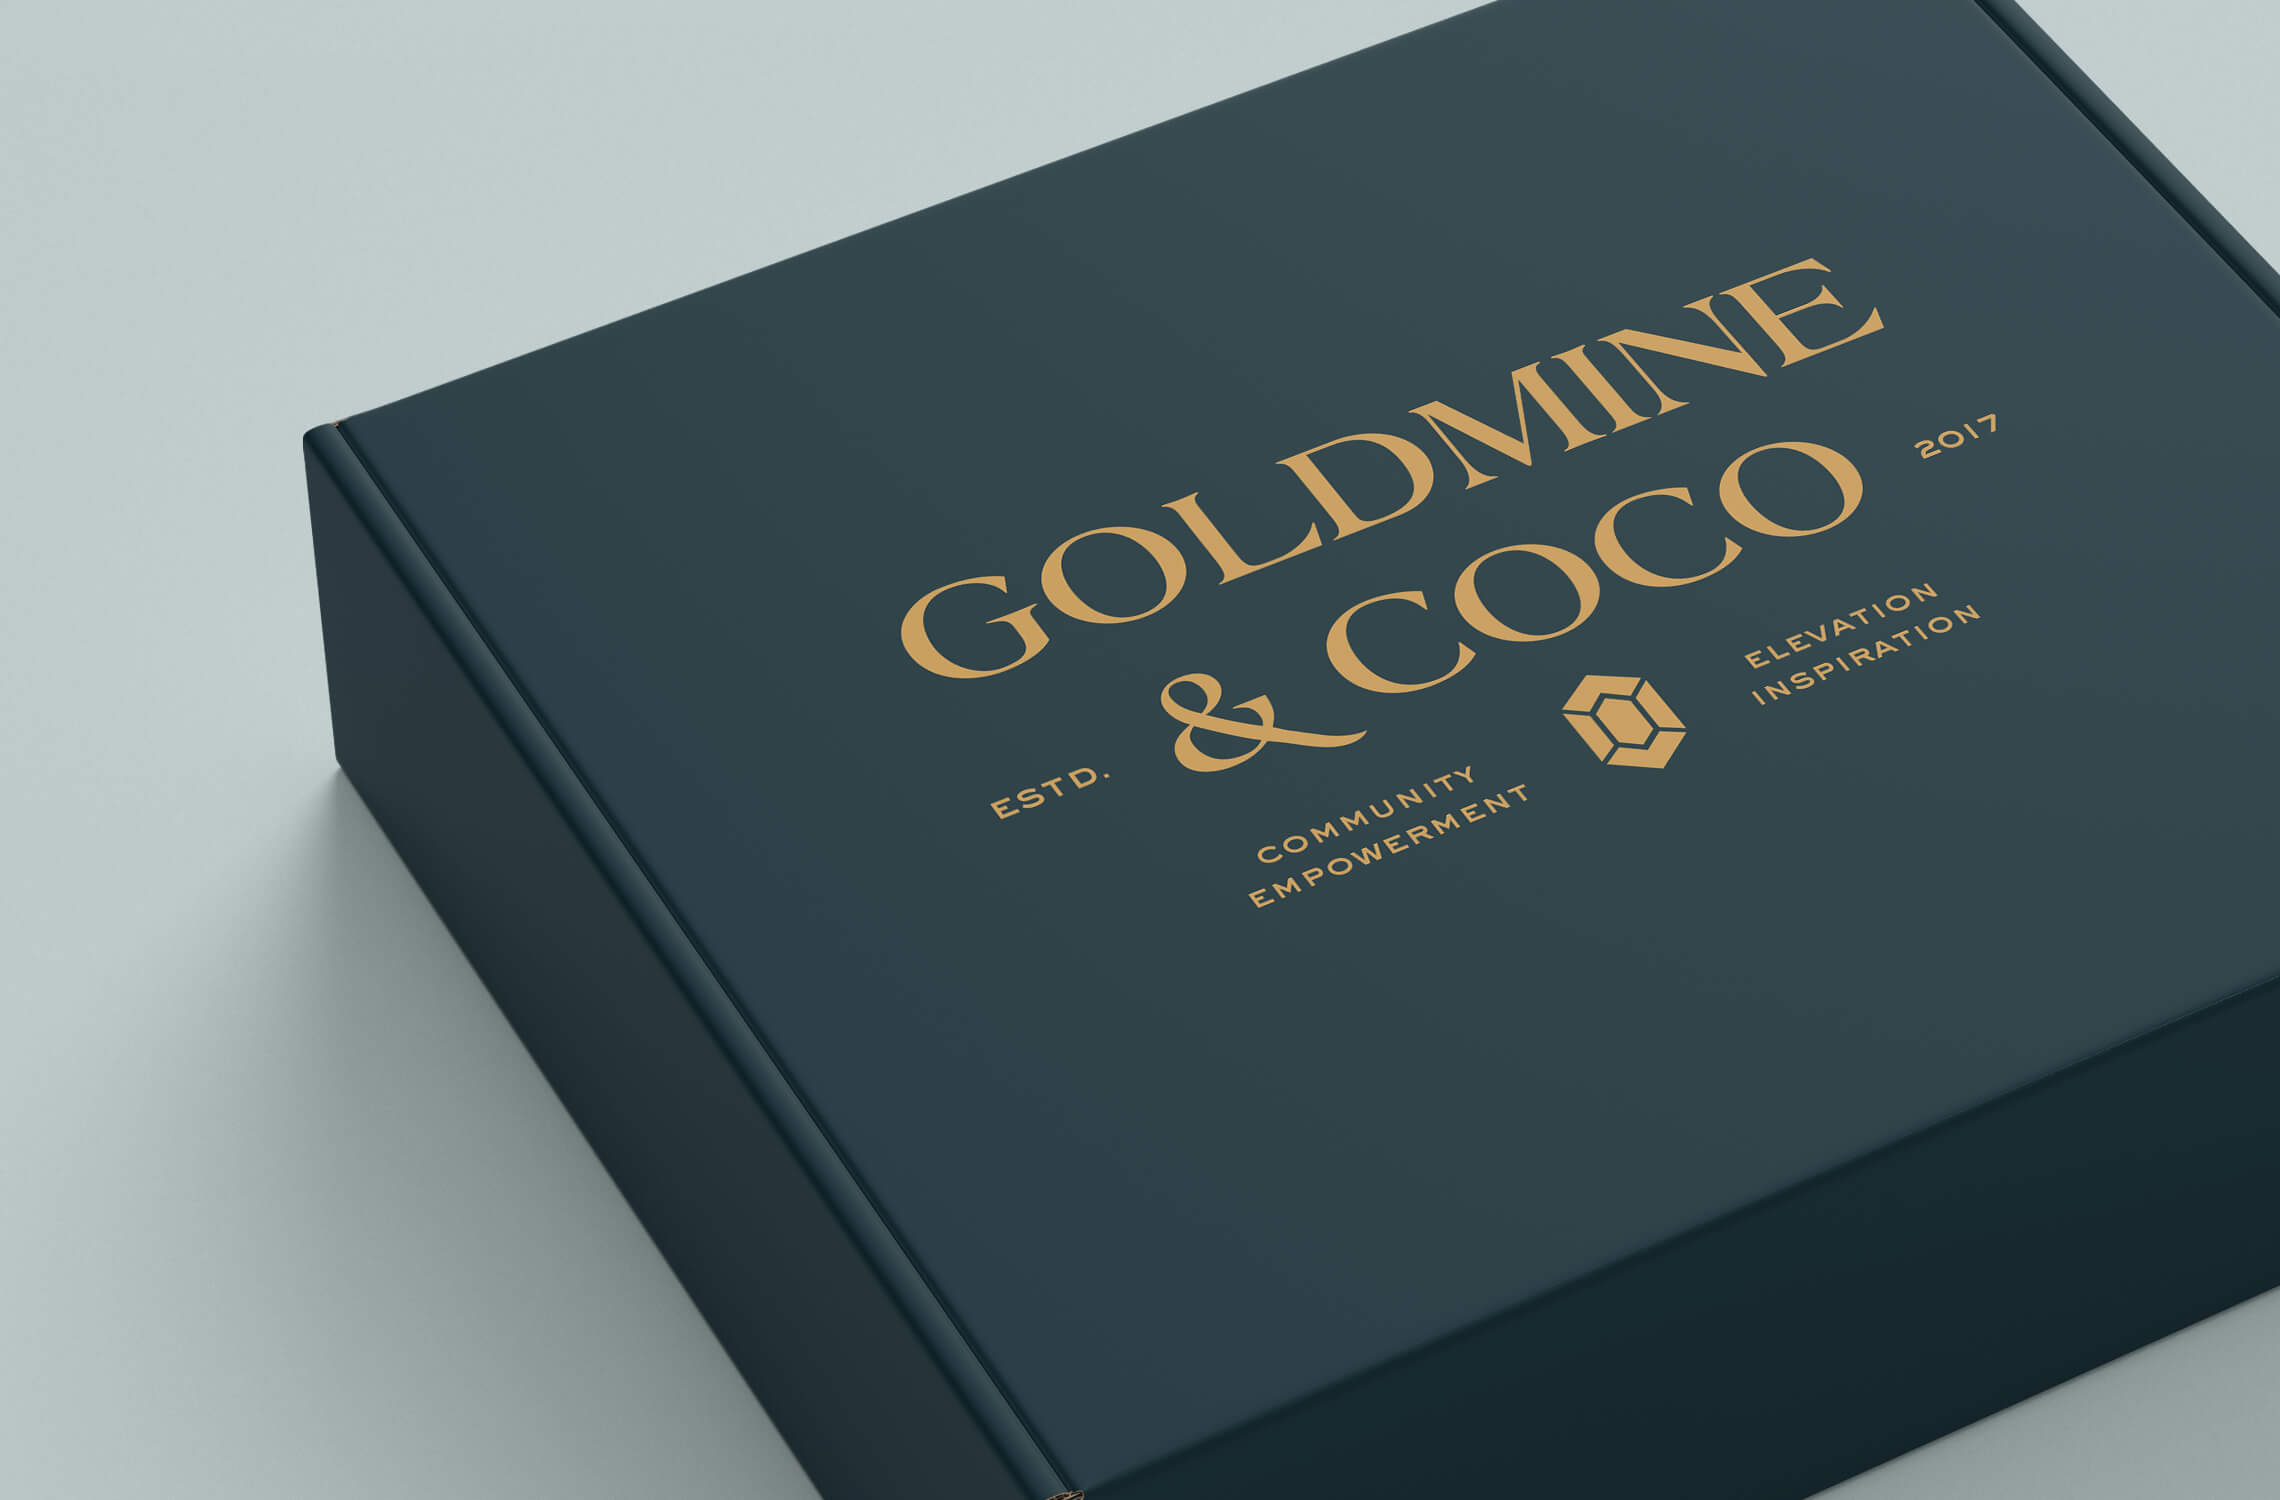 branding services including brand strategy for a stationery brand, Goldmine & Coco